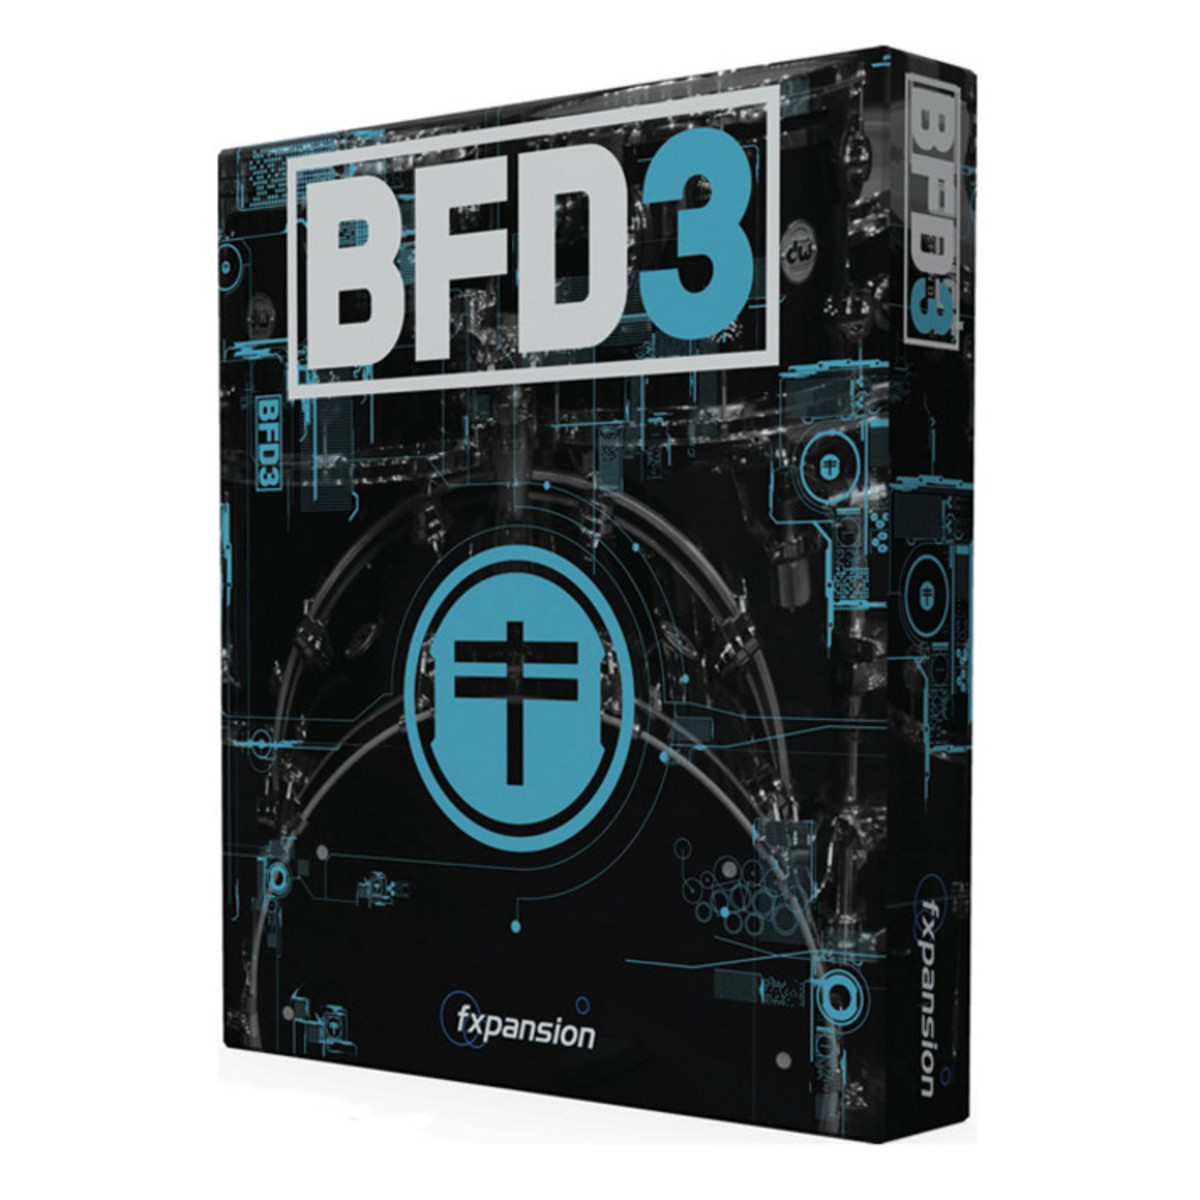 bfd drum software